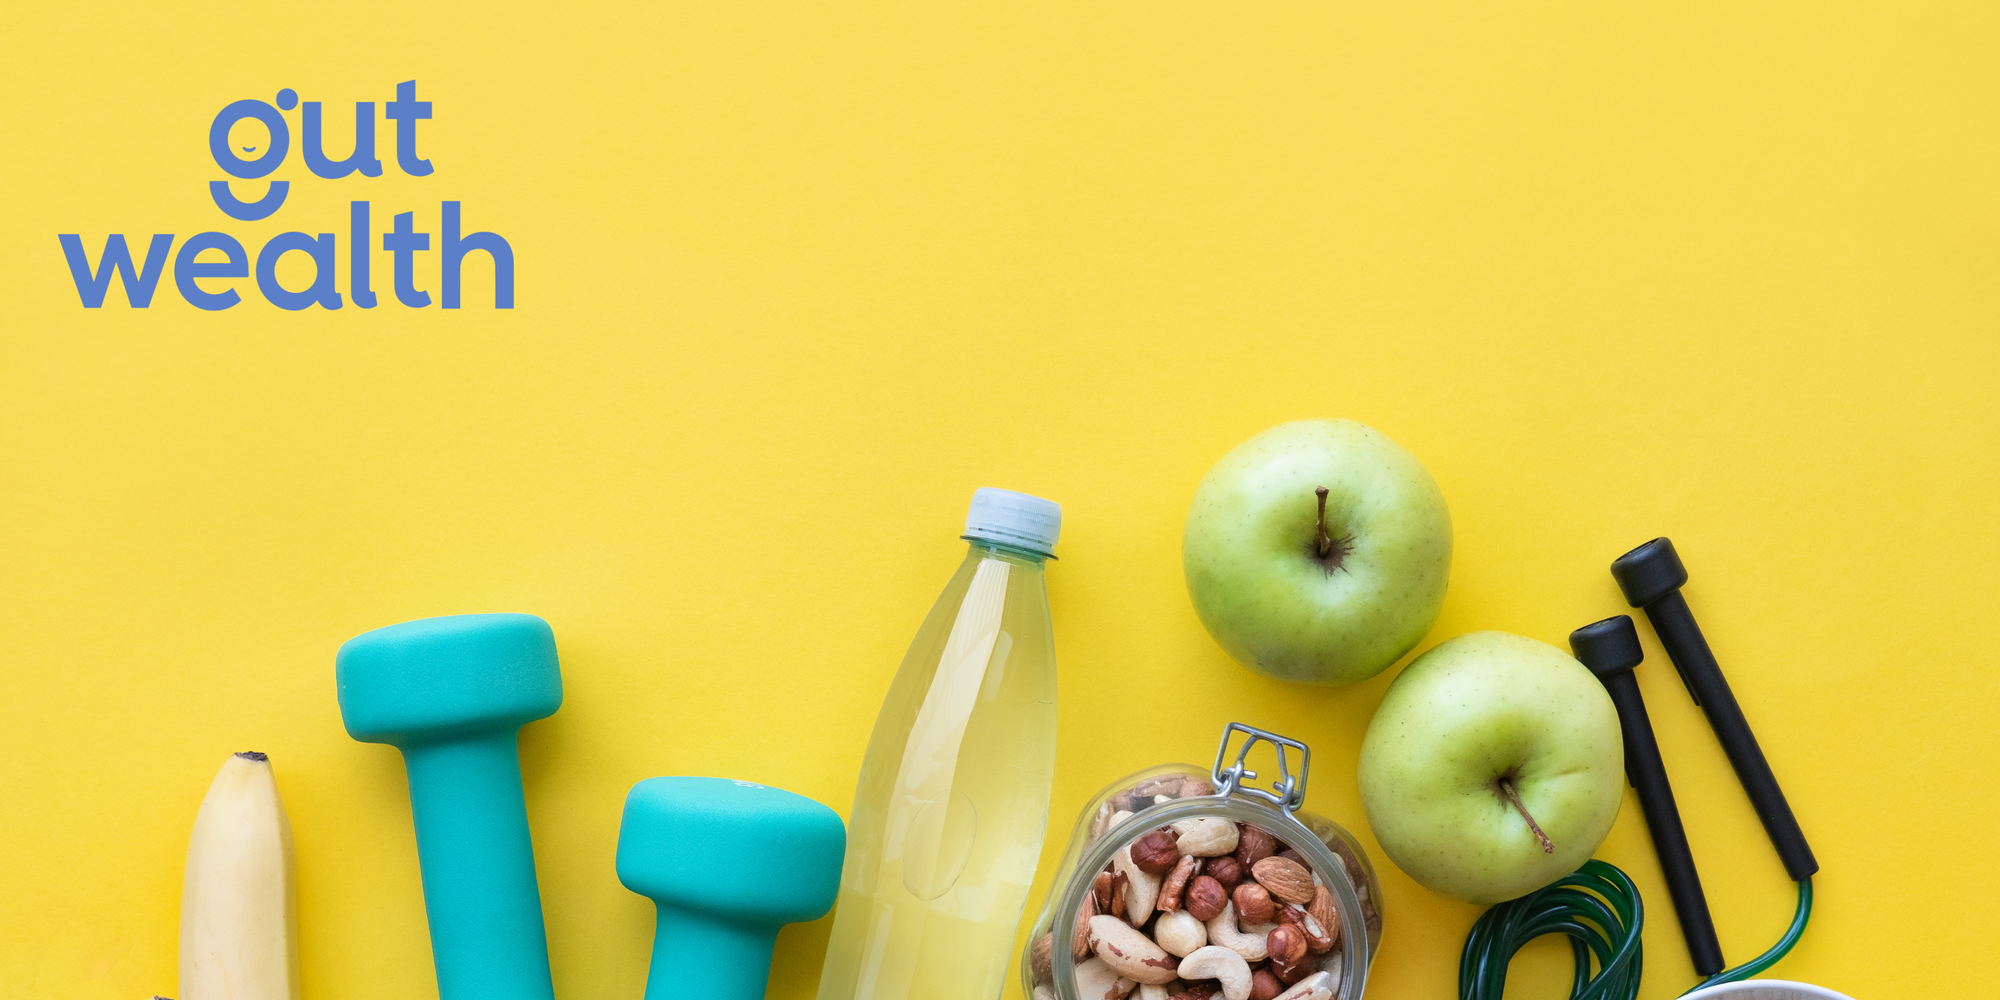 The 5 Basics of Good Health: Let's Keep it Simple